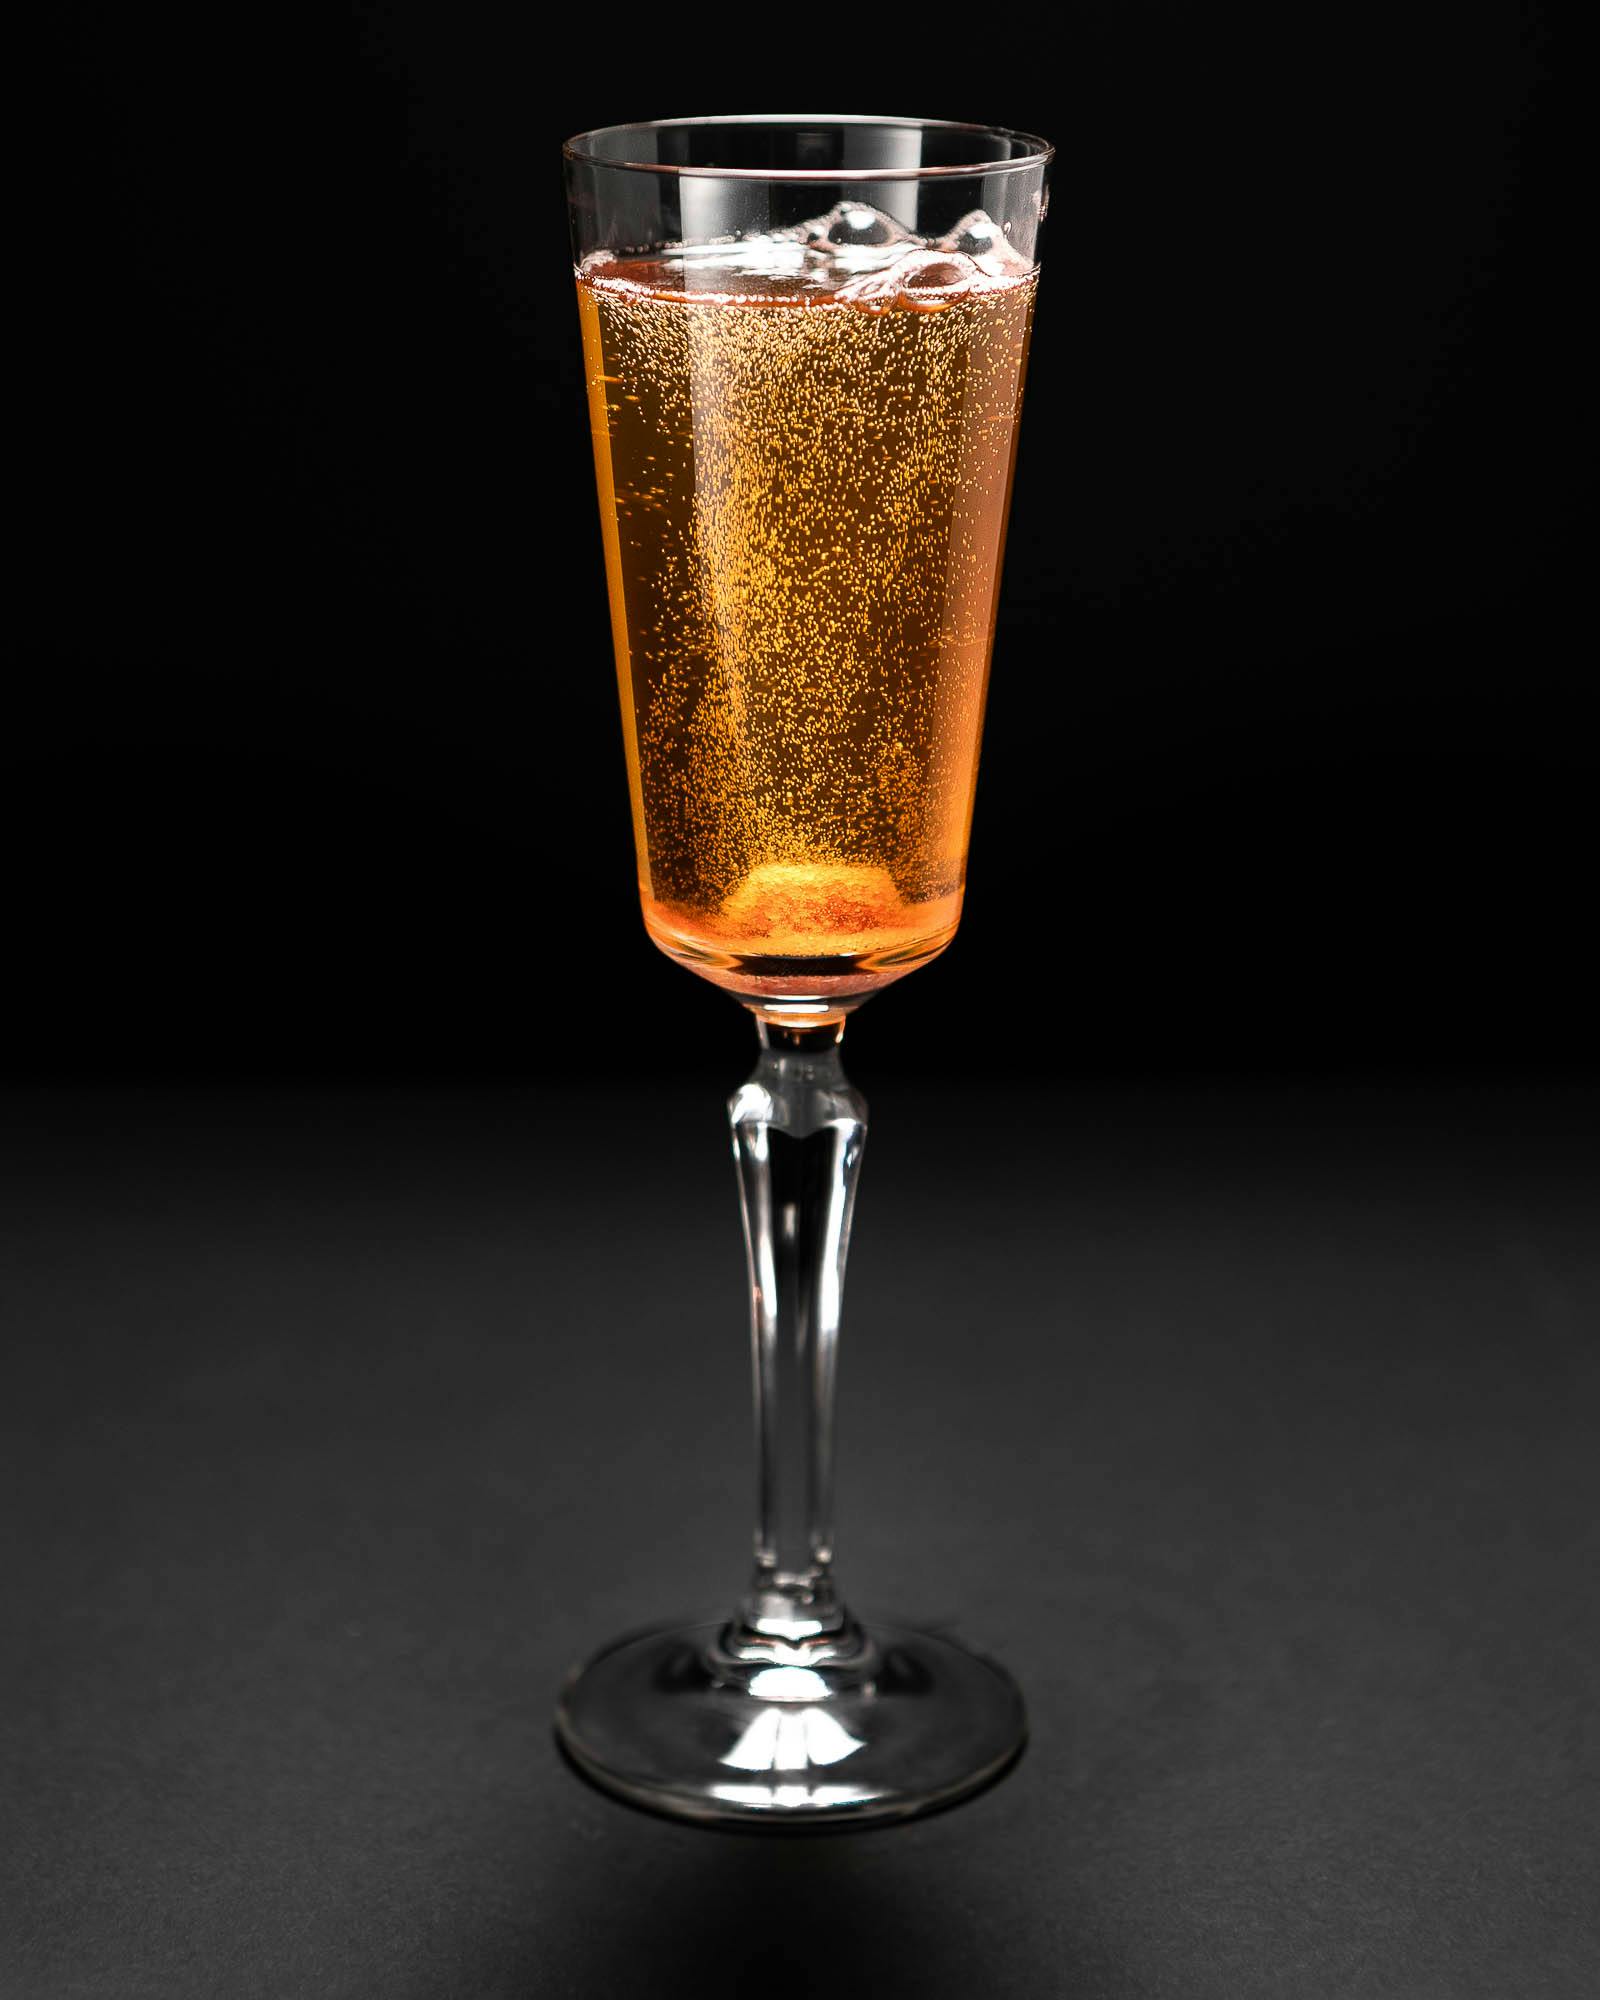 Classic Champagne Cocktail